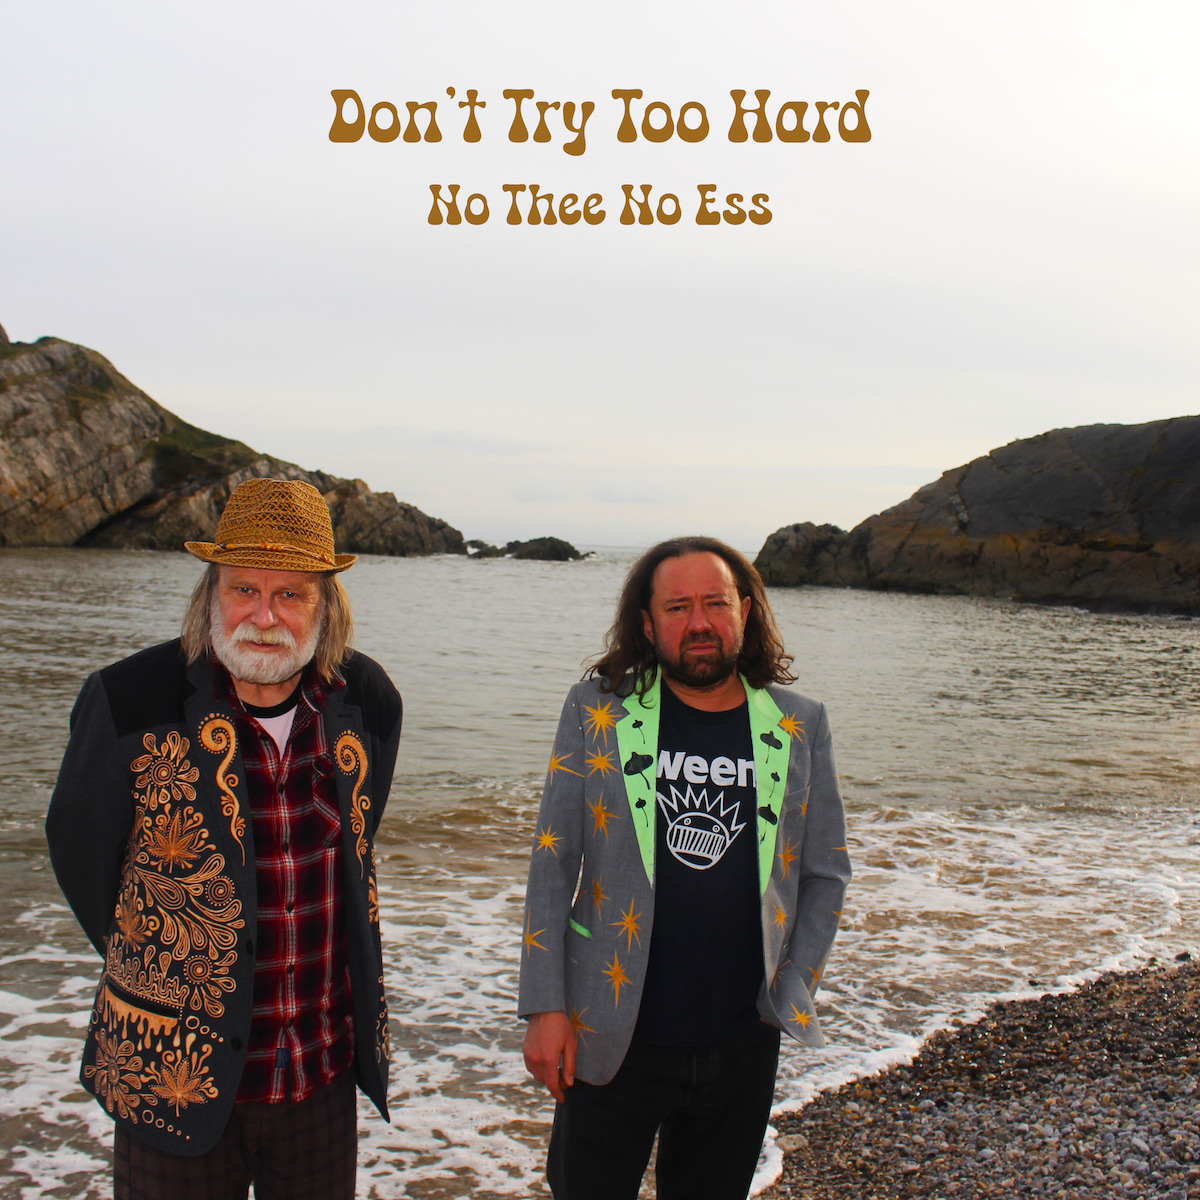 LISTEN: “Don’t Try too Hard” by No Thee No Ess